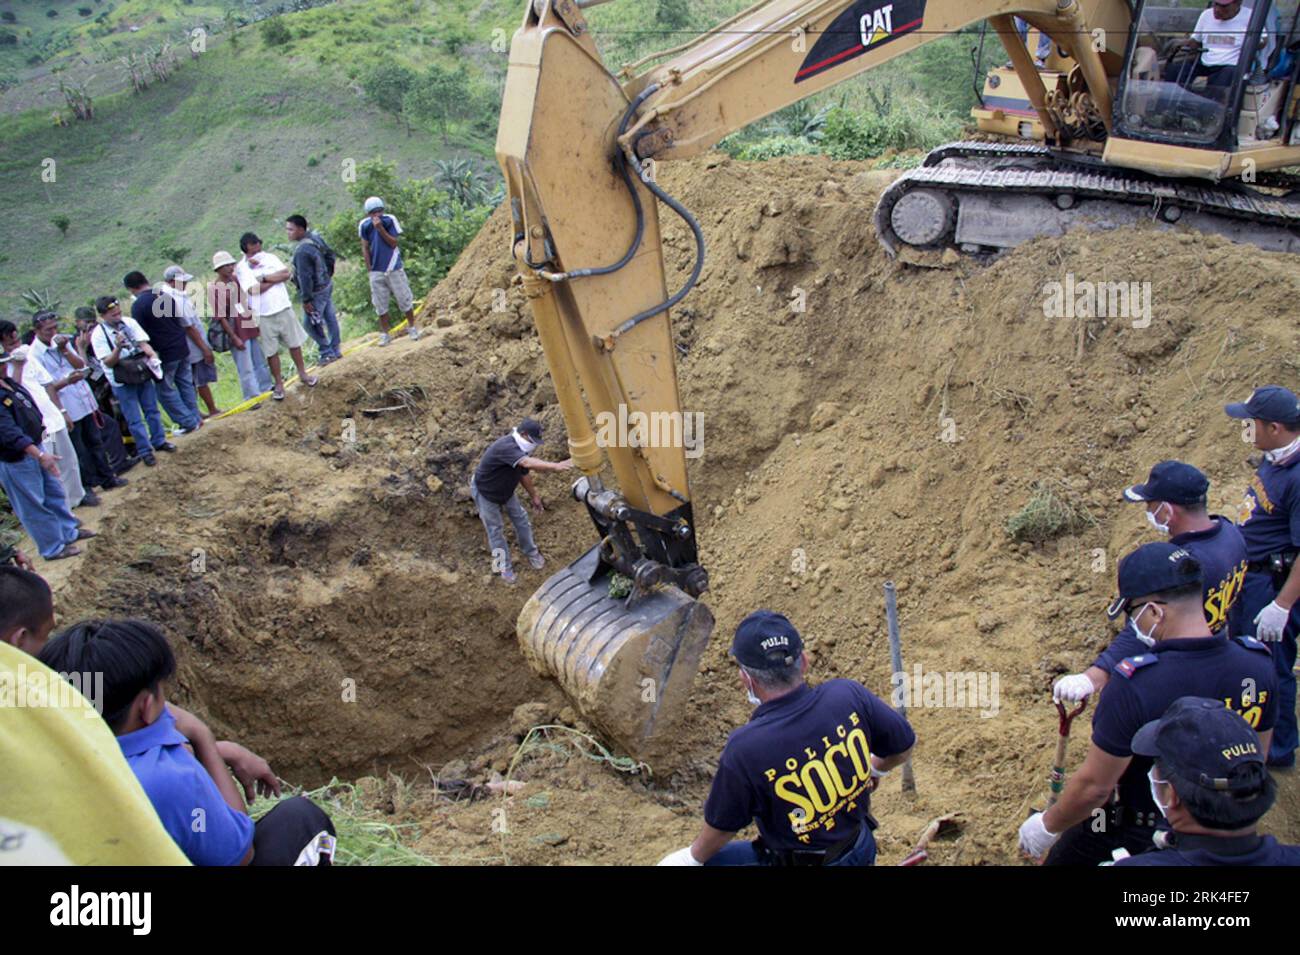 Bildnummer: 53625889  Datum: 24.11.2009  Copyright: imago/Xinhua (091125) -- MANILA, Nov. 25, 2009 (Xinhua) -- A bulldozer works to recover the bodies of victims at the scene of a massacre of a political clan in the southern township of Ampatuan in Maguindanao, the Philippines, Nov. 24, 2009. The province of Maguindanao has been placed under a state of emergency after some 46 were killed on 23 November in the worst-ever election related violence in the country. (Xinhua/Stringer) (2)PHILIPPINES-MAGUINDANAO-MASSACRE PUBLICATIONxNOTxINxCHN Massaker Philippinen Gesellschaft Kriminalität Politik kb Stock Photo